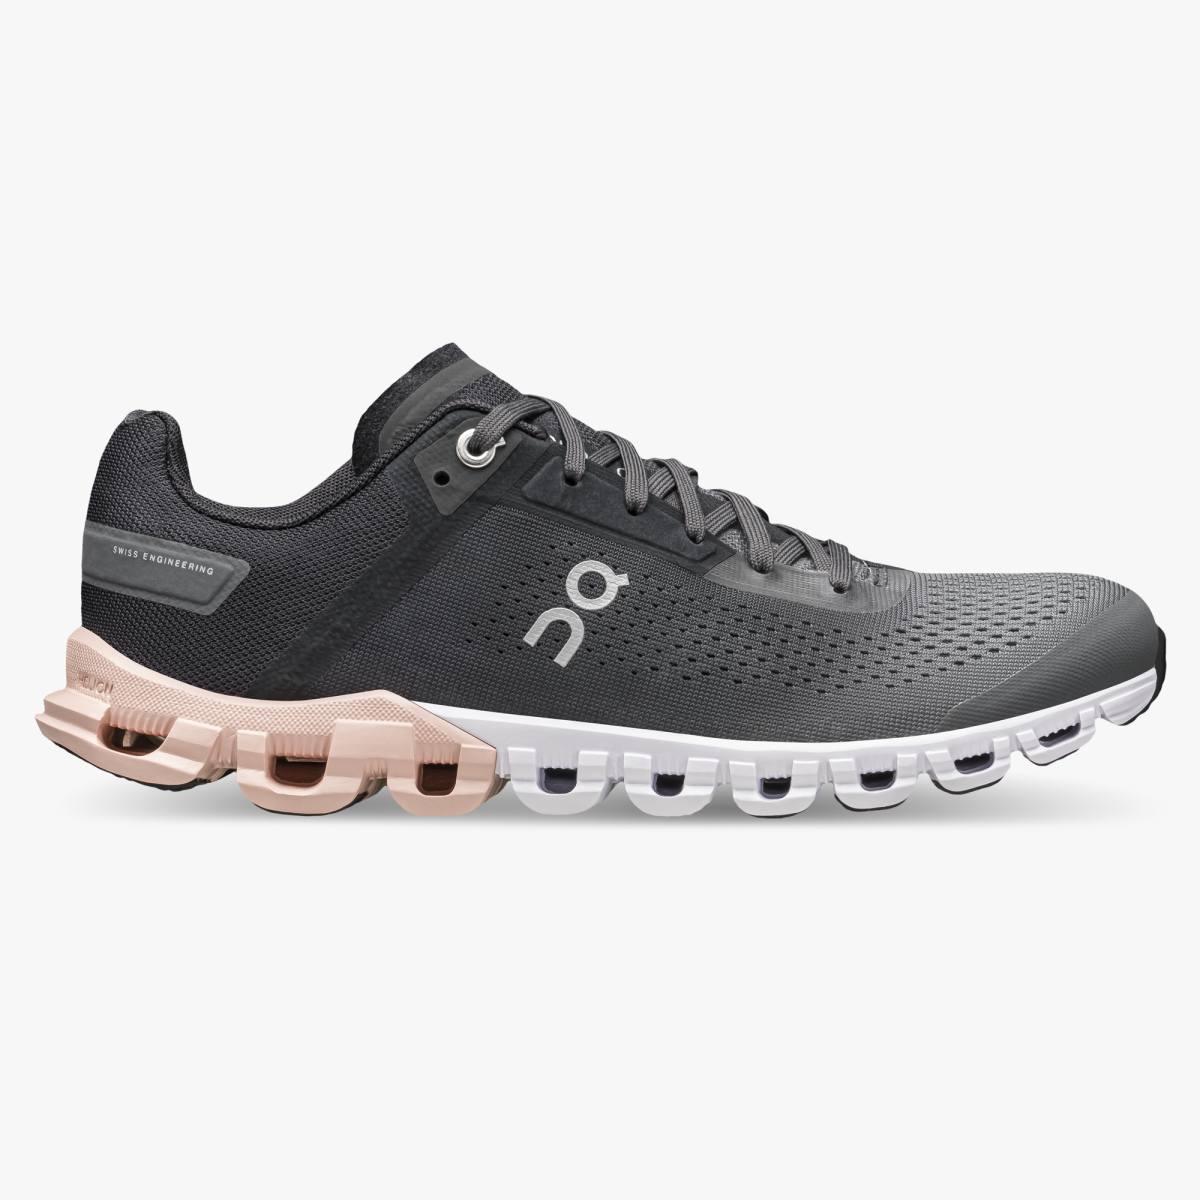 On Womens Cloudflow Running Shoes - Rock/rose